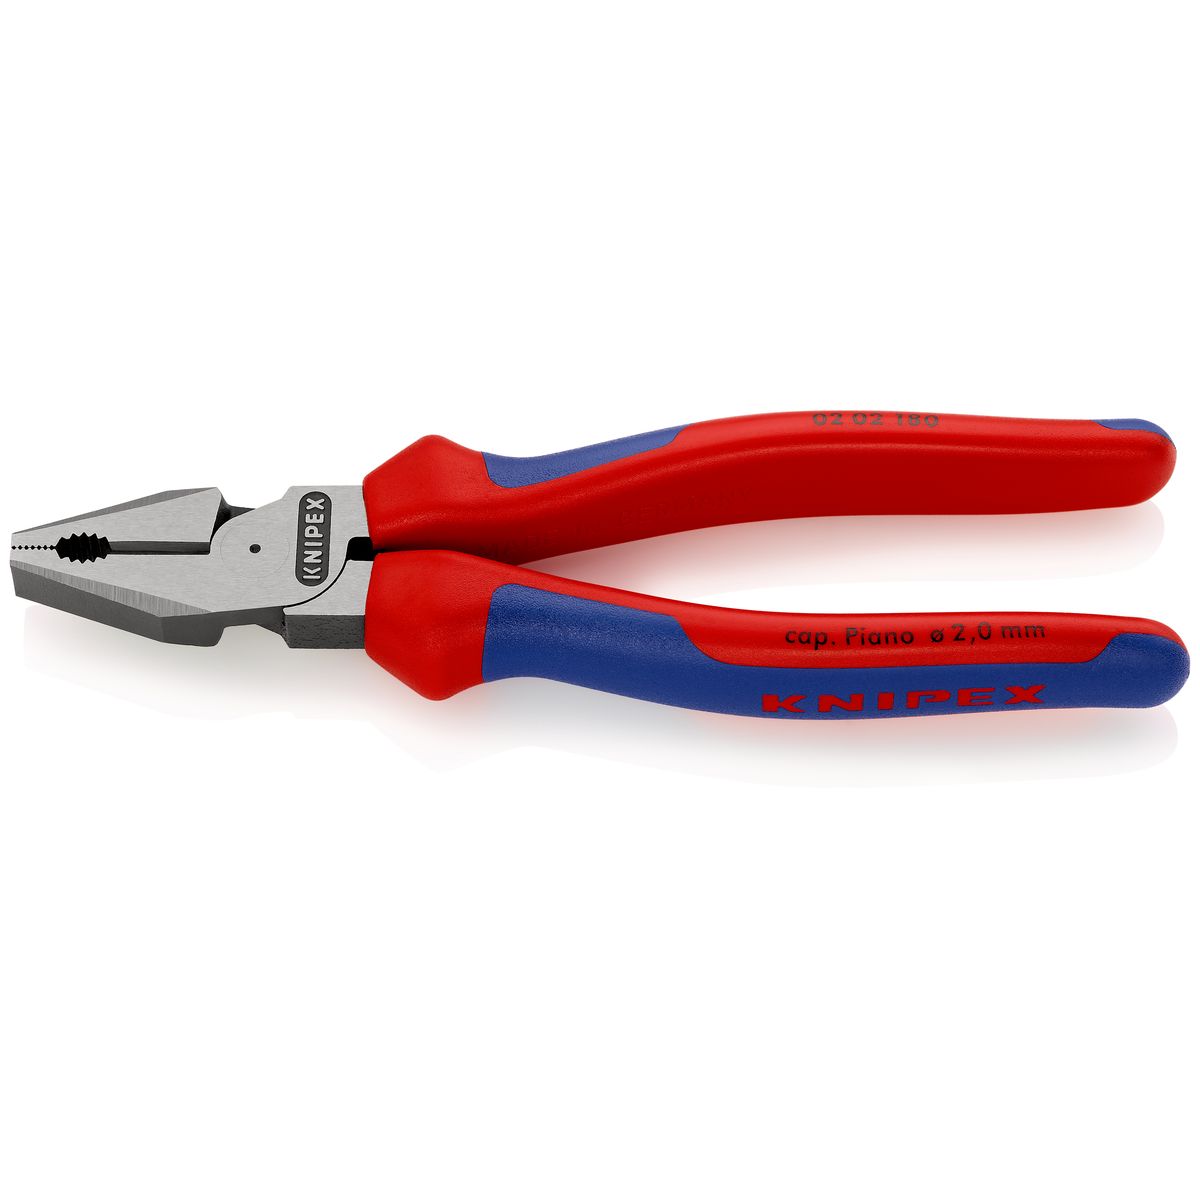 COMBINATION PLIERS 0202 180mm Knipex